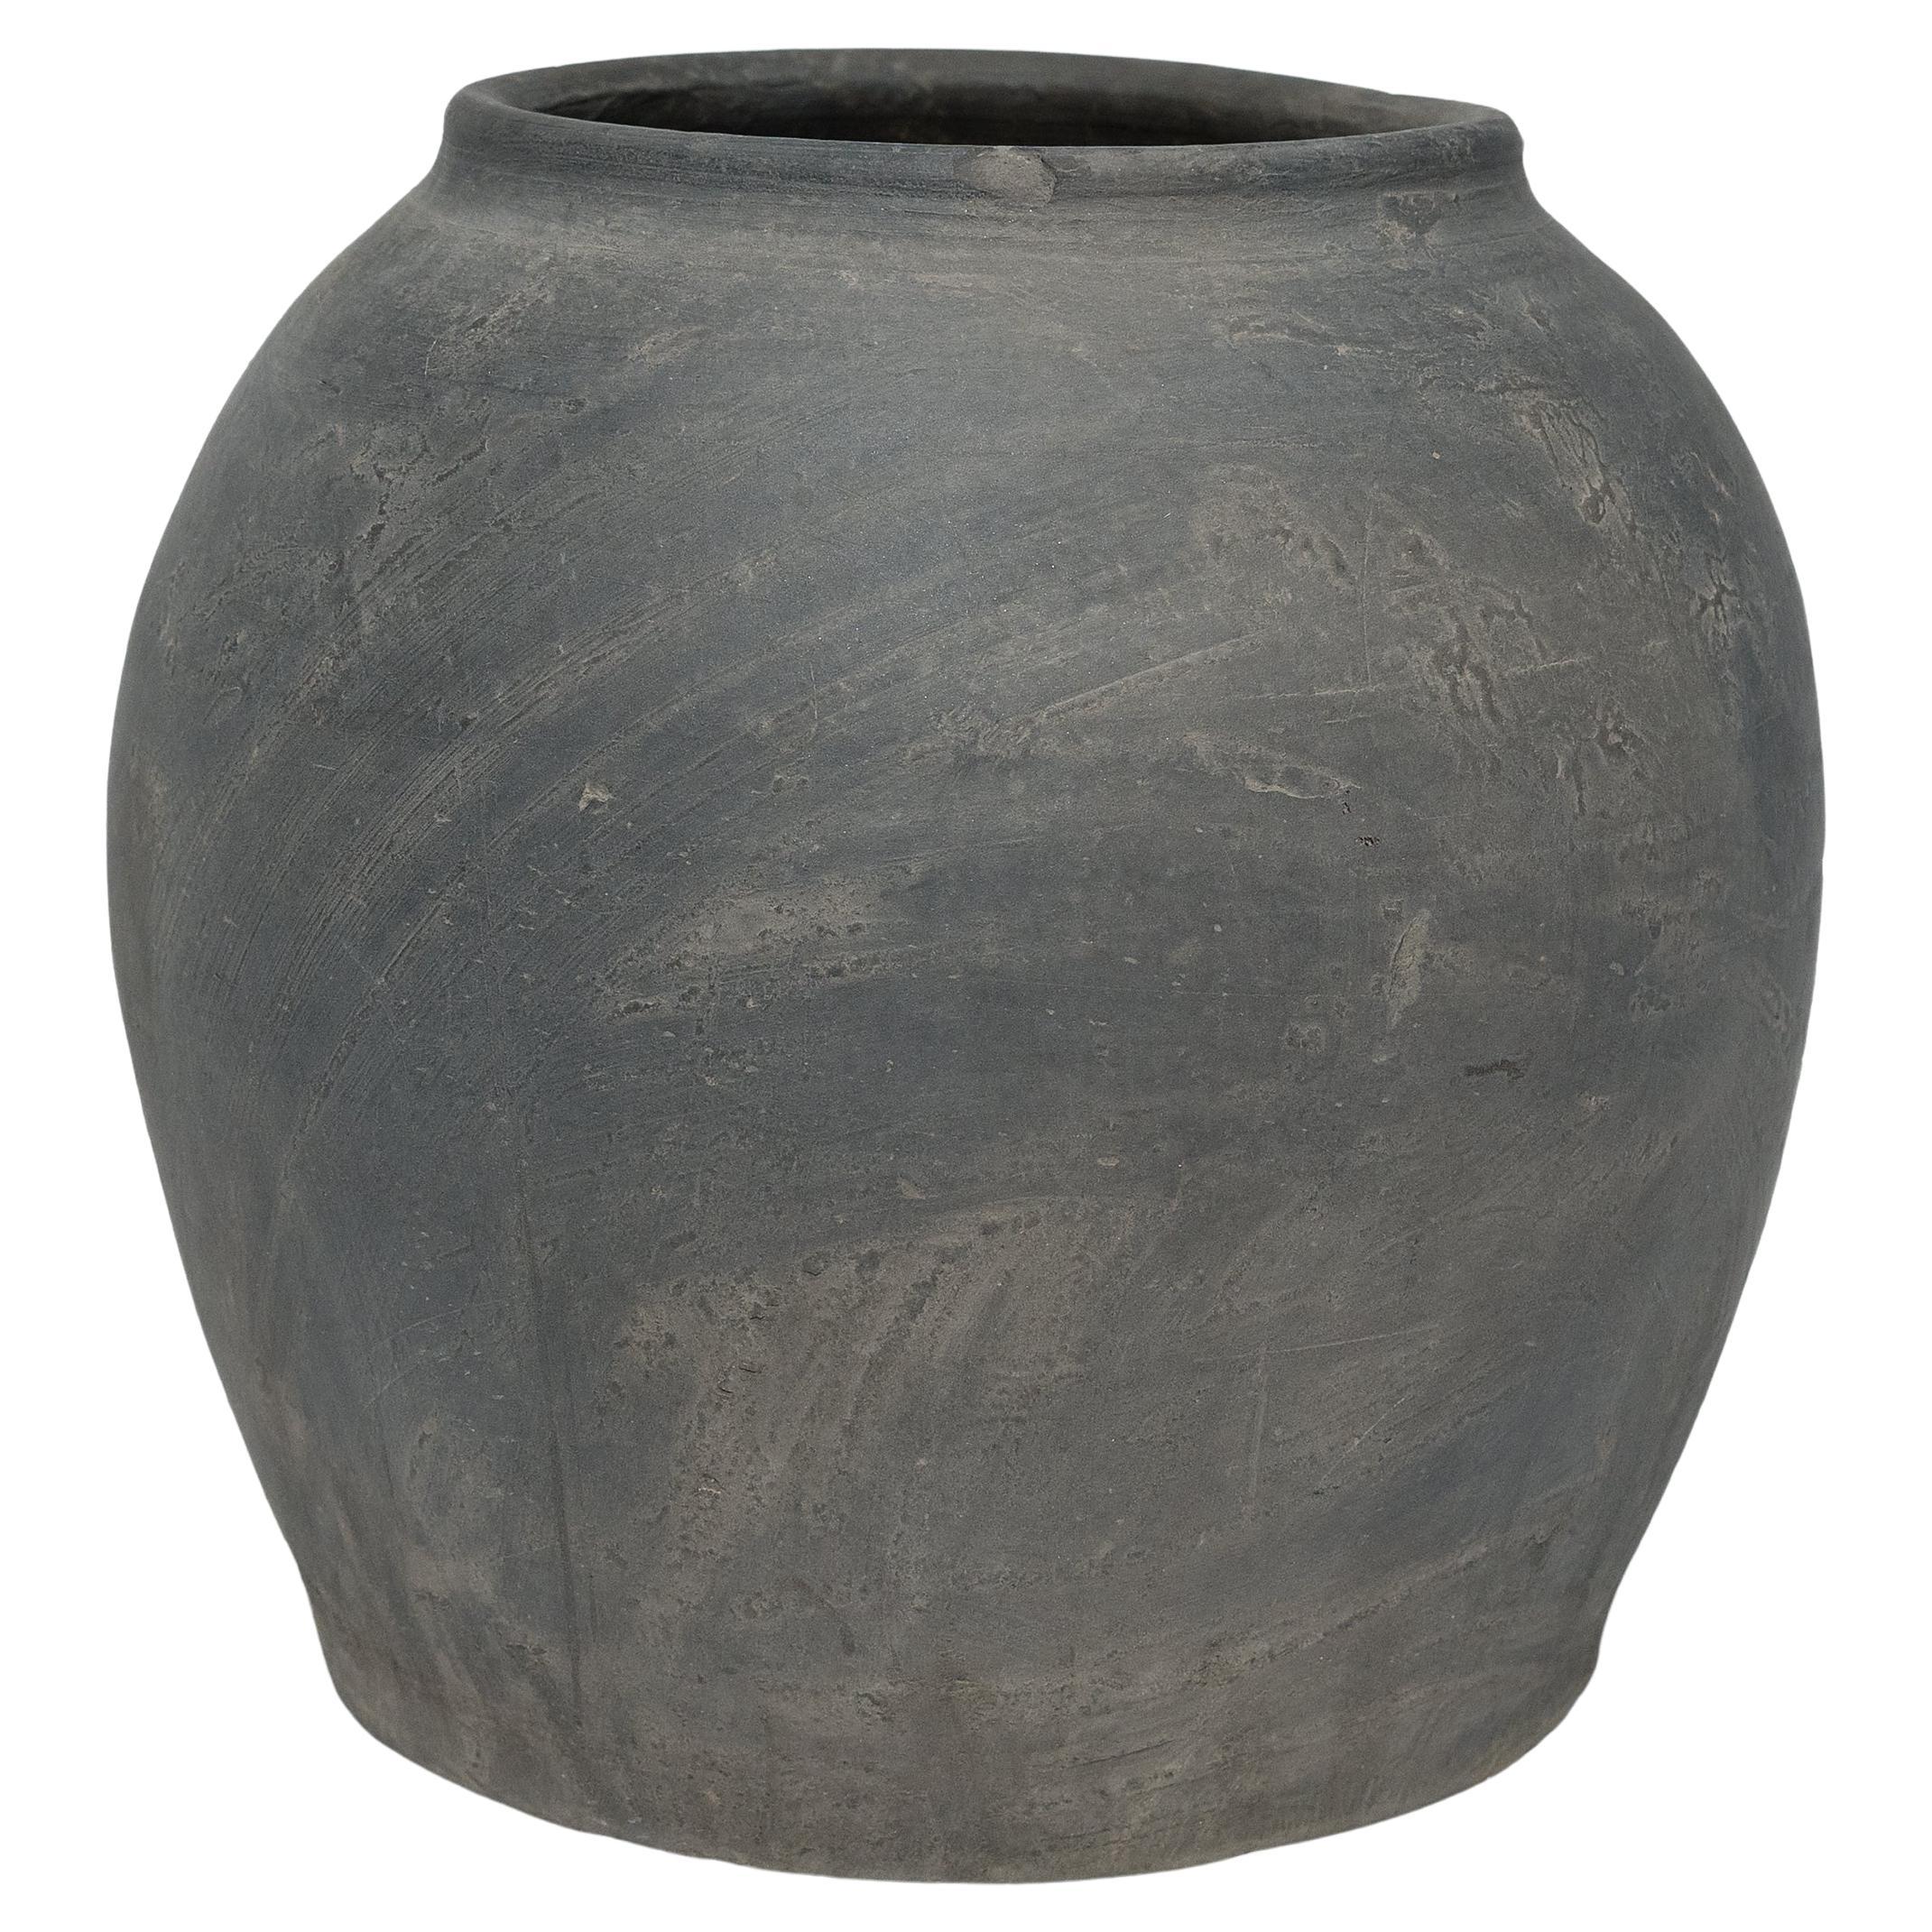 Black Chinese Clay Vessel, c. 1900